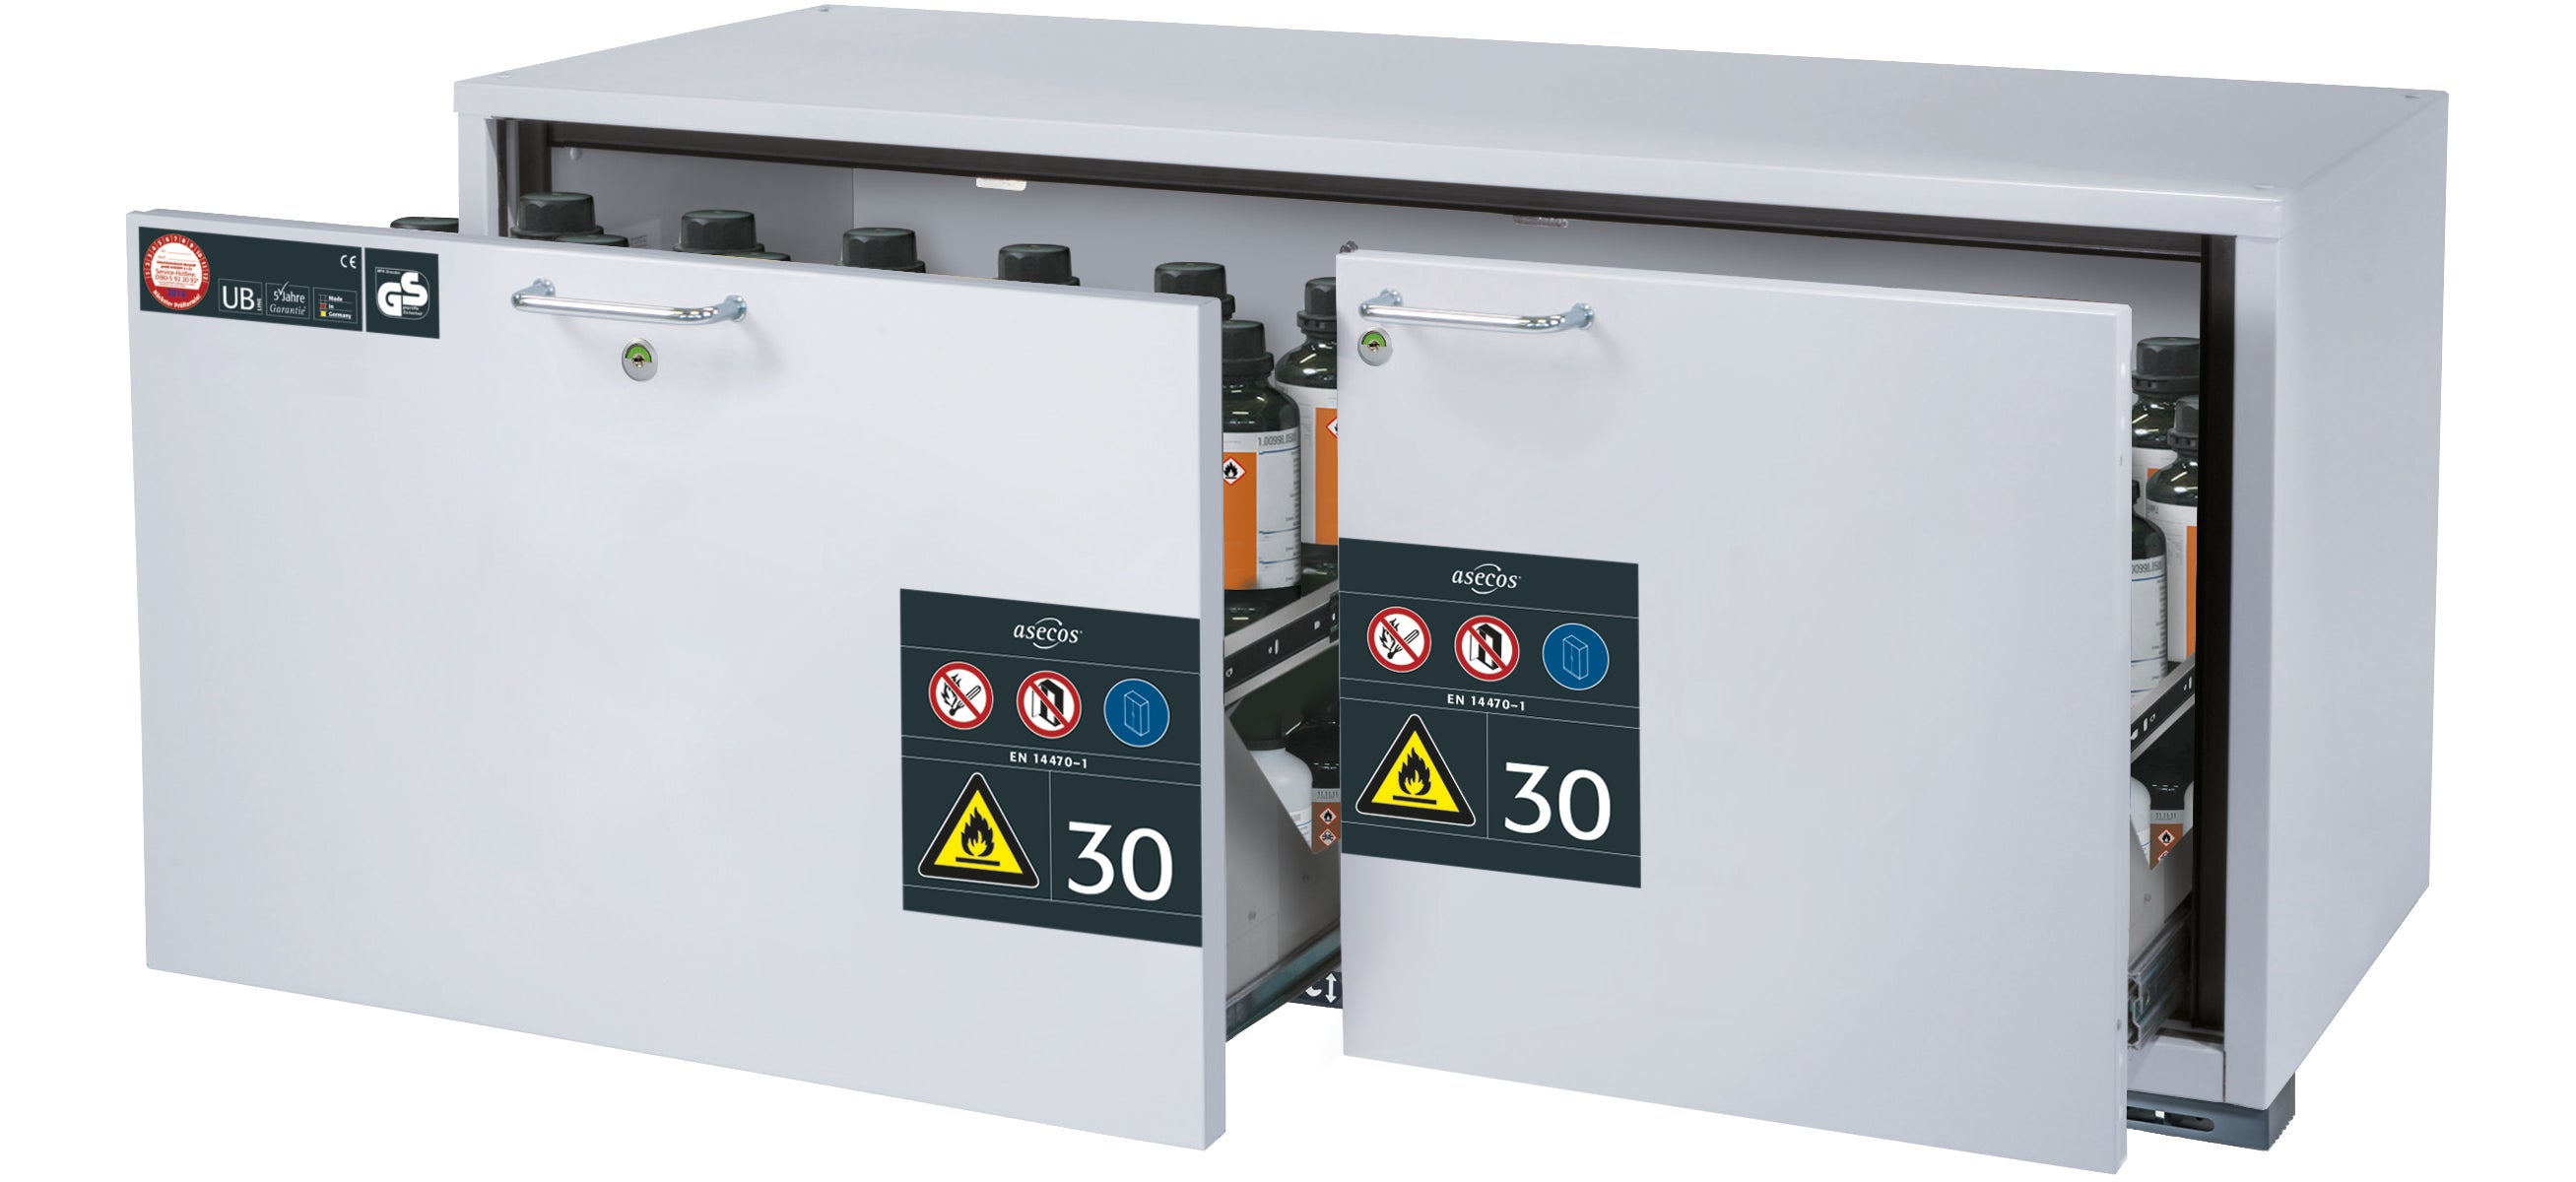 Type 30 safety base cabinet UB-S-30 model UB30.060.140.2S in light gray RAL 7035 with 2x drawer tray STAWA-R (stainless steel 1.4301)